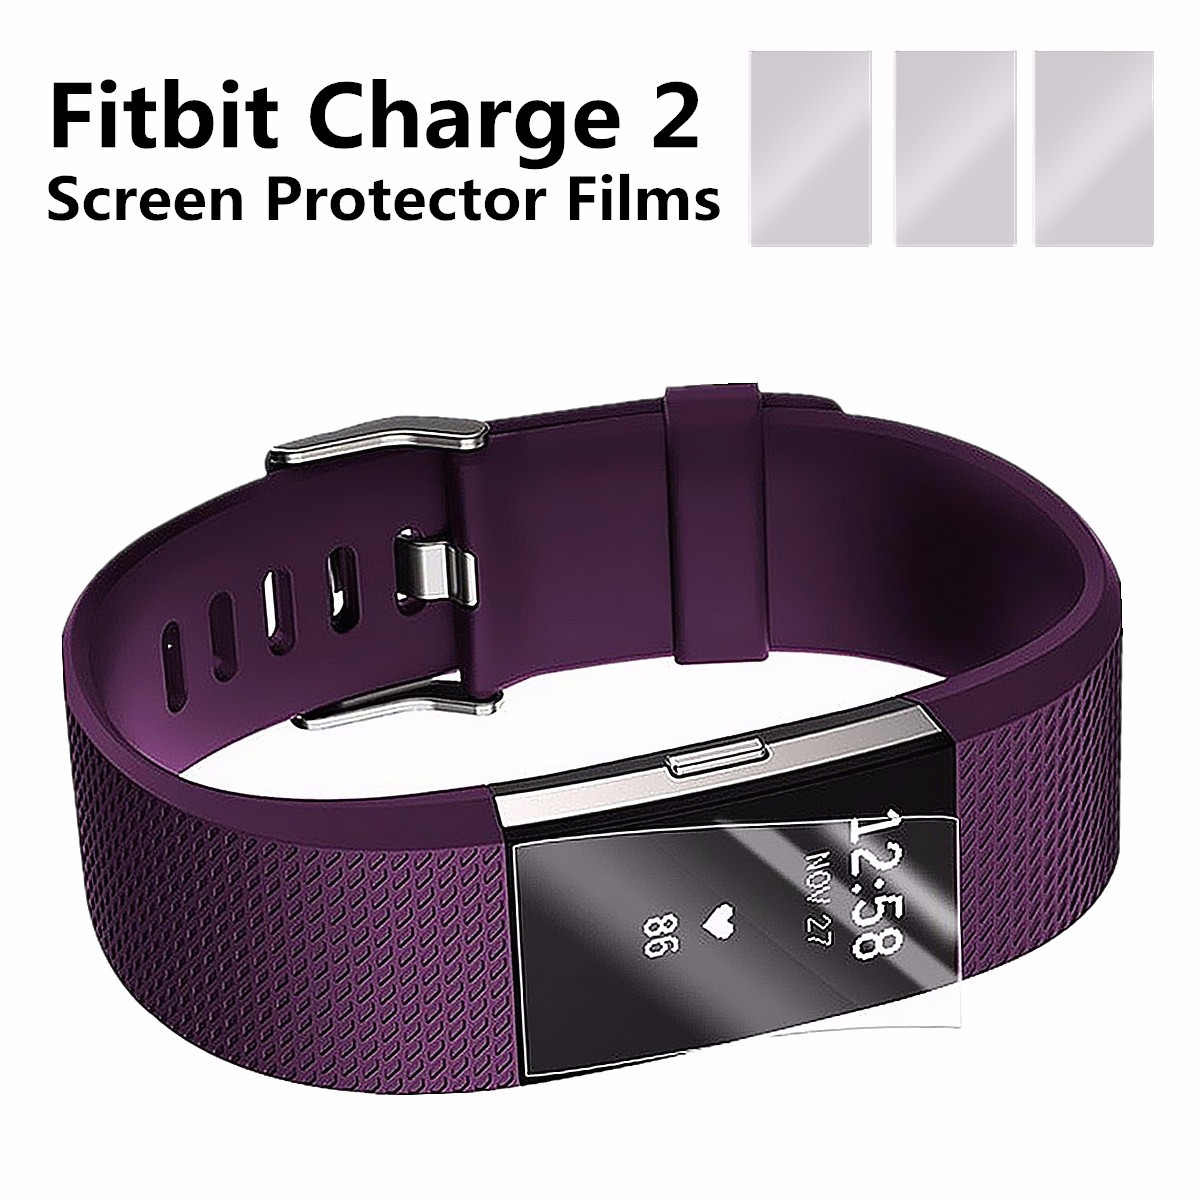 3x-Anti-Scratch-Clear-HD-Screen-Protector-Films-Shield-Guard-For-Fitbit-Charge-2-1166928